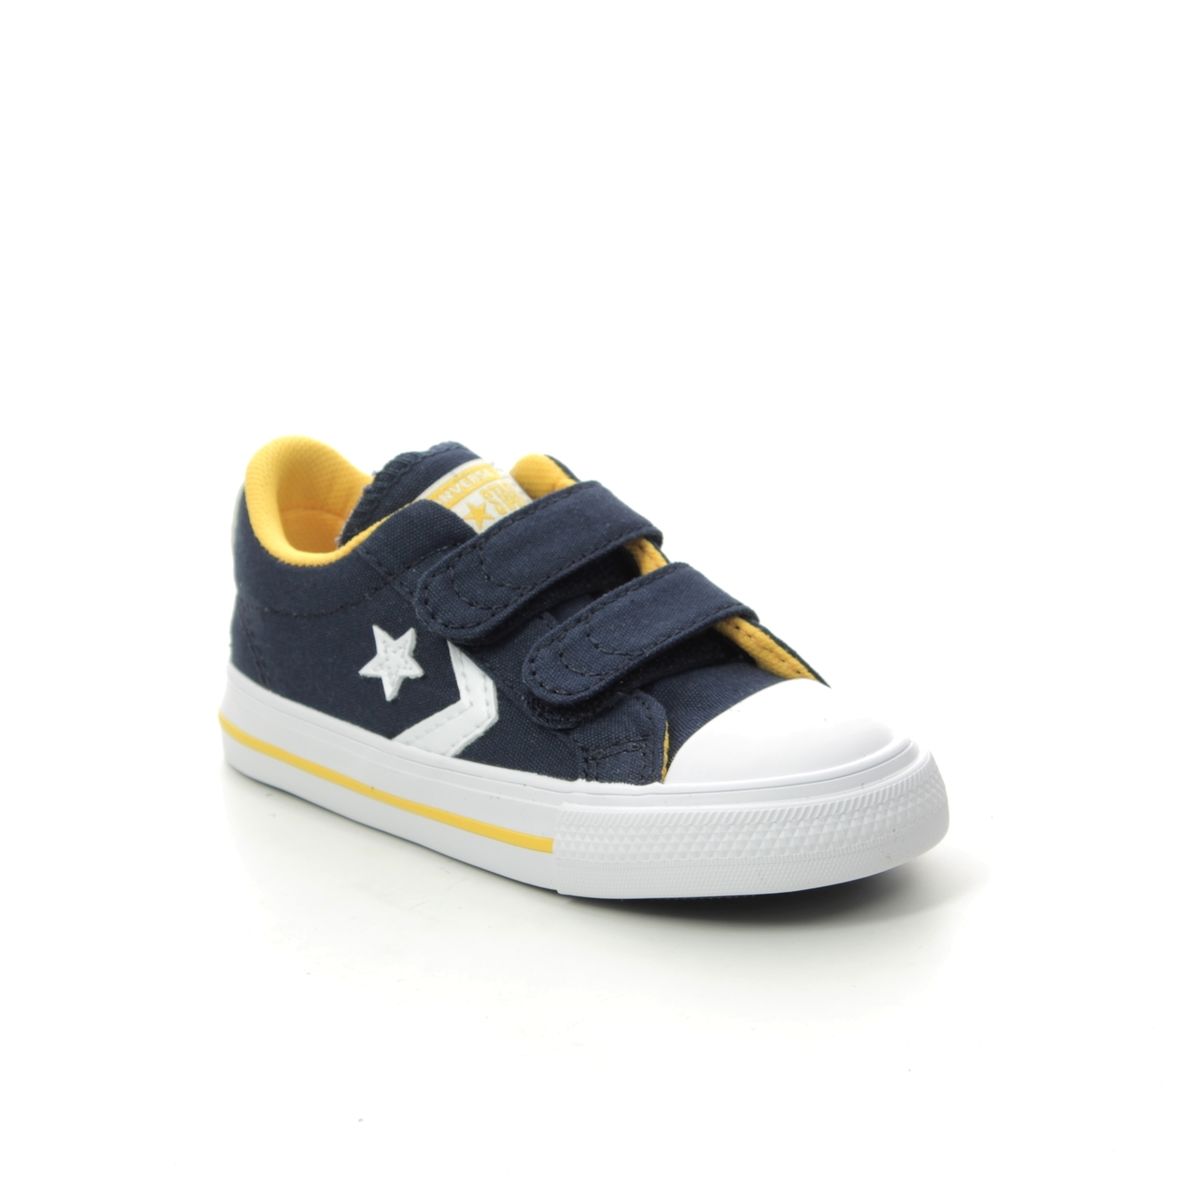 Converse Star Player 2v 766956C-012 Navy Yellow trainers